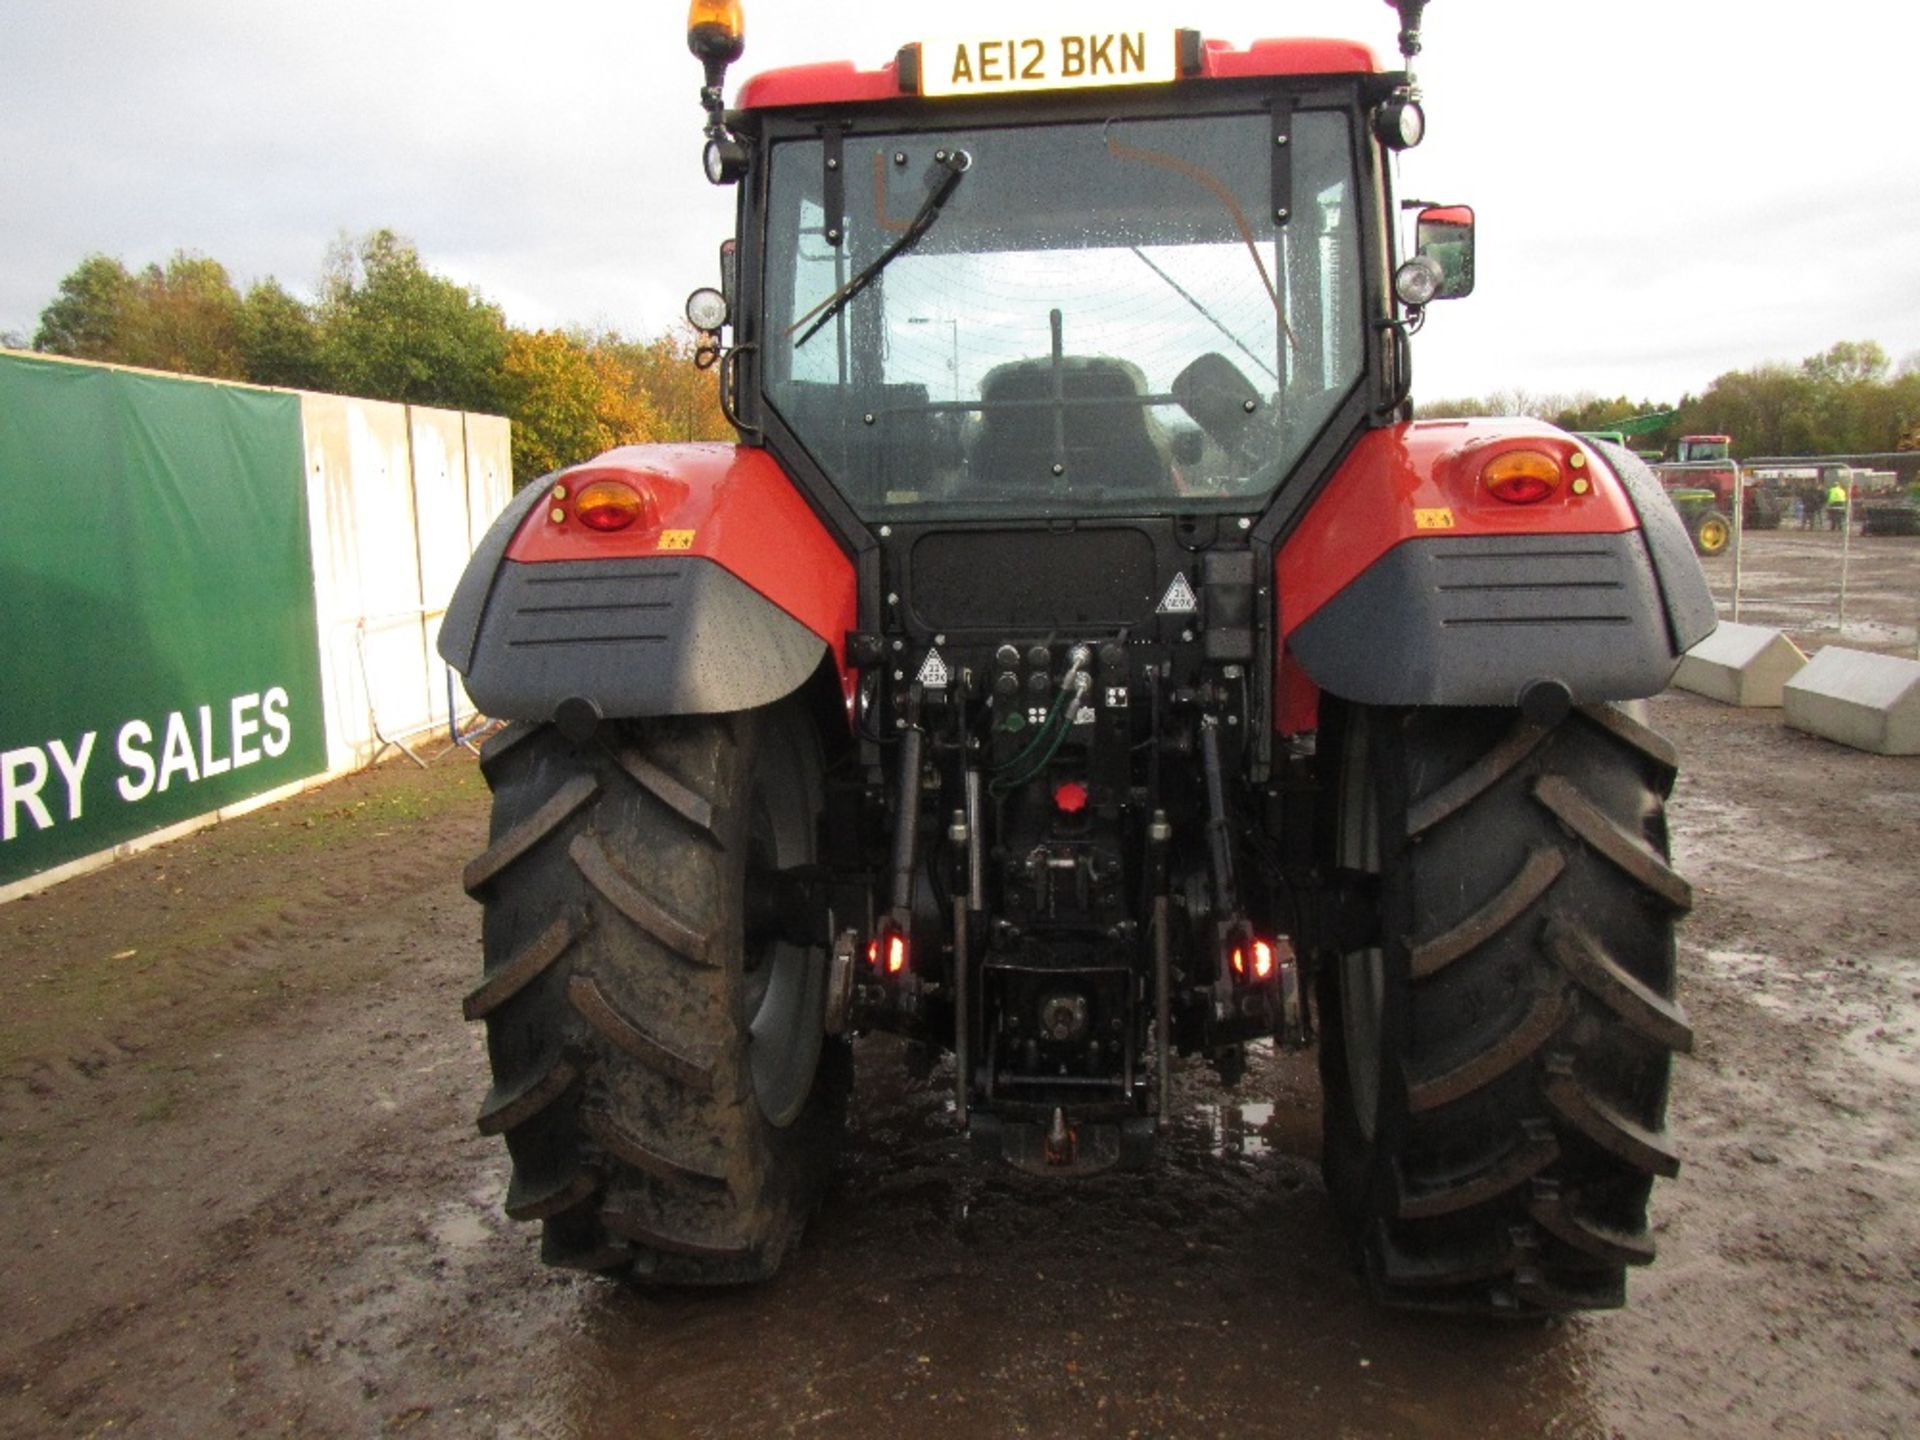 Zetor Forterra 125 4wd Tractor. 260 Trac Lift Loader. Reg Docs will be supplied. Reg. No. AE12 BKN. - Image 7 of 15